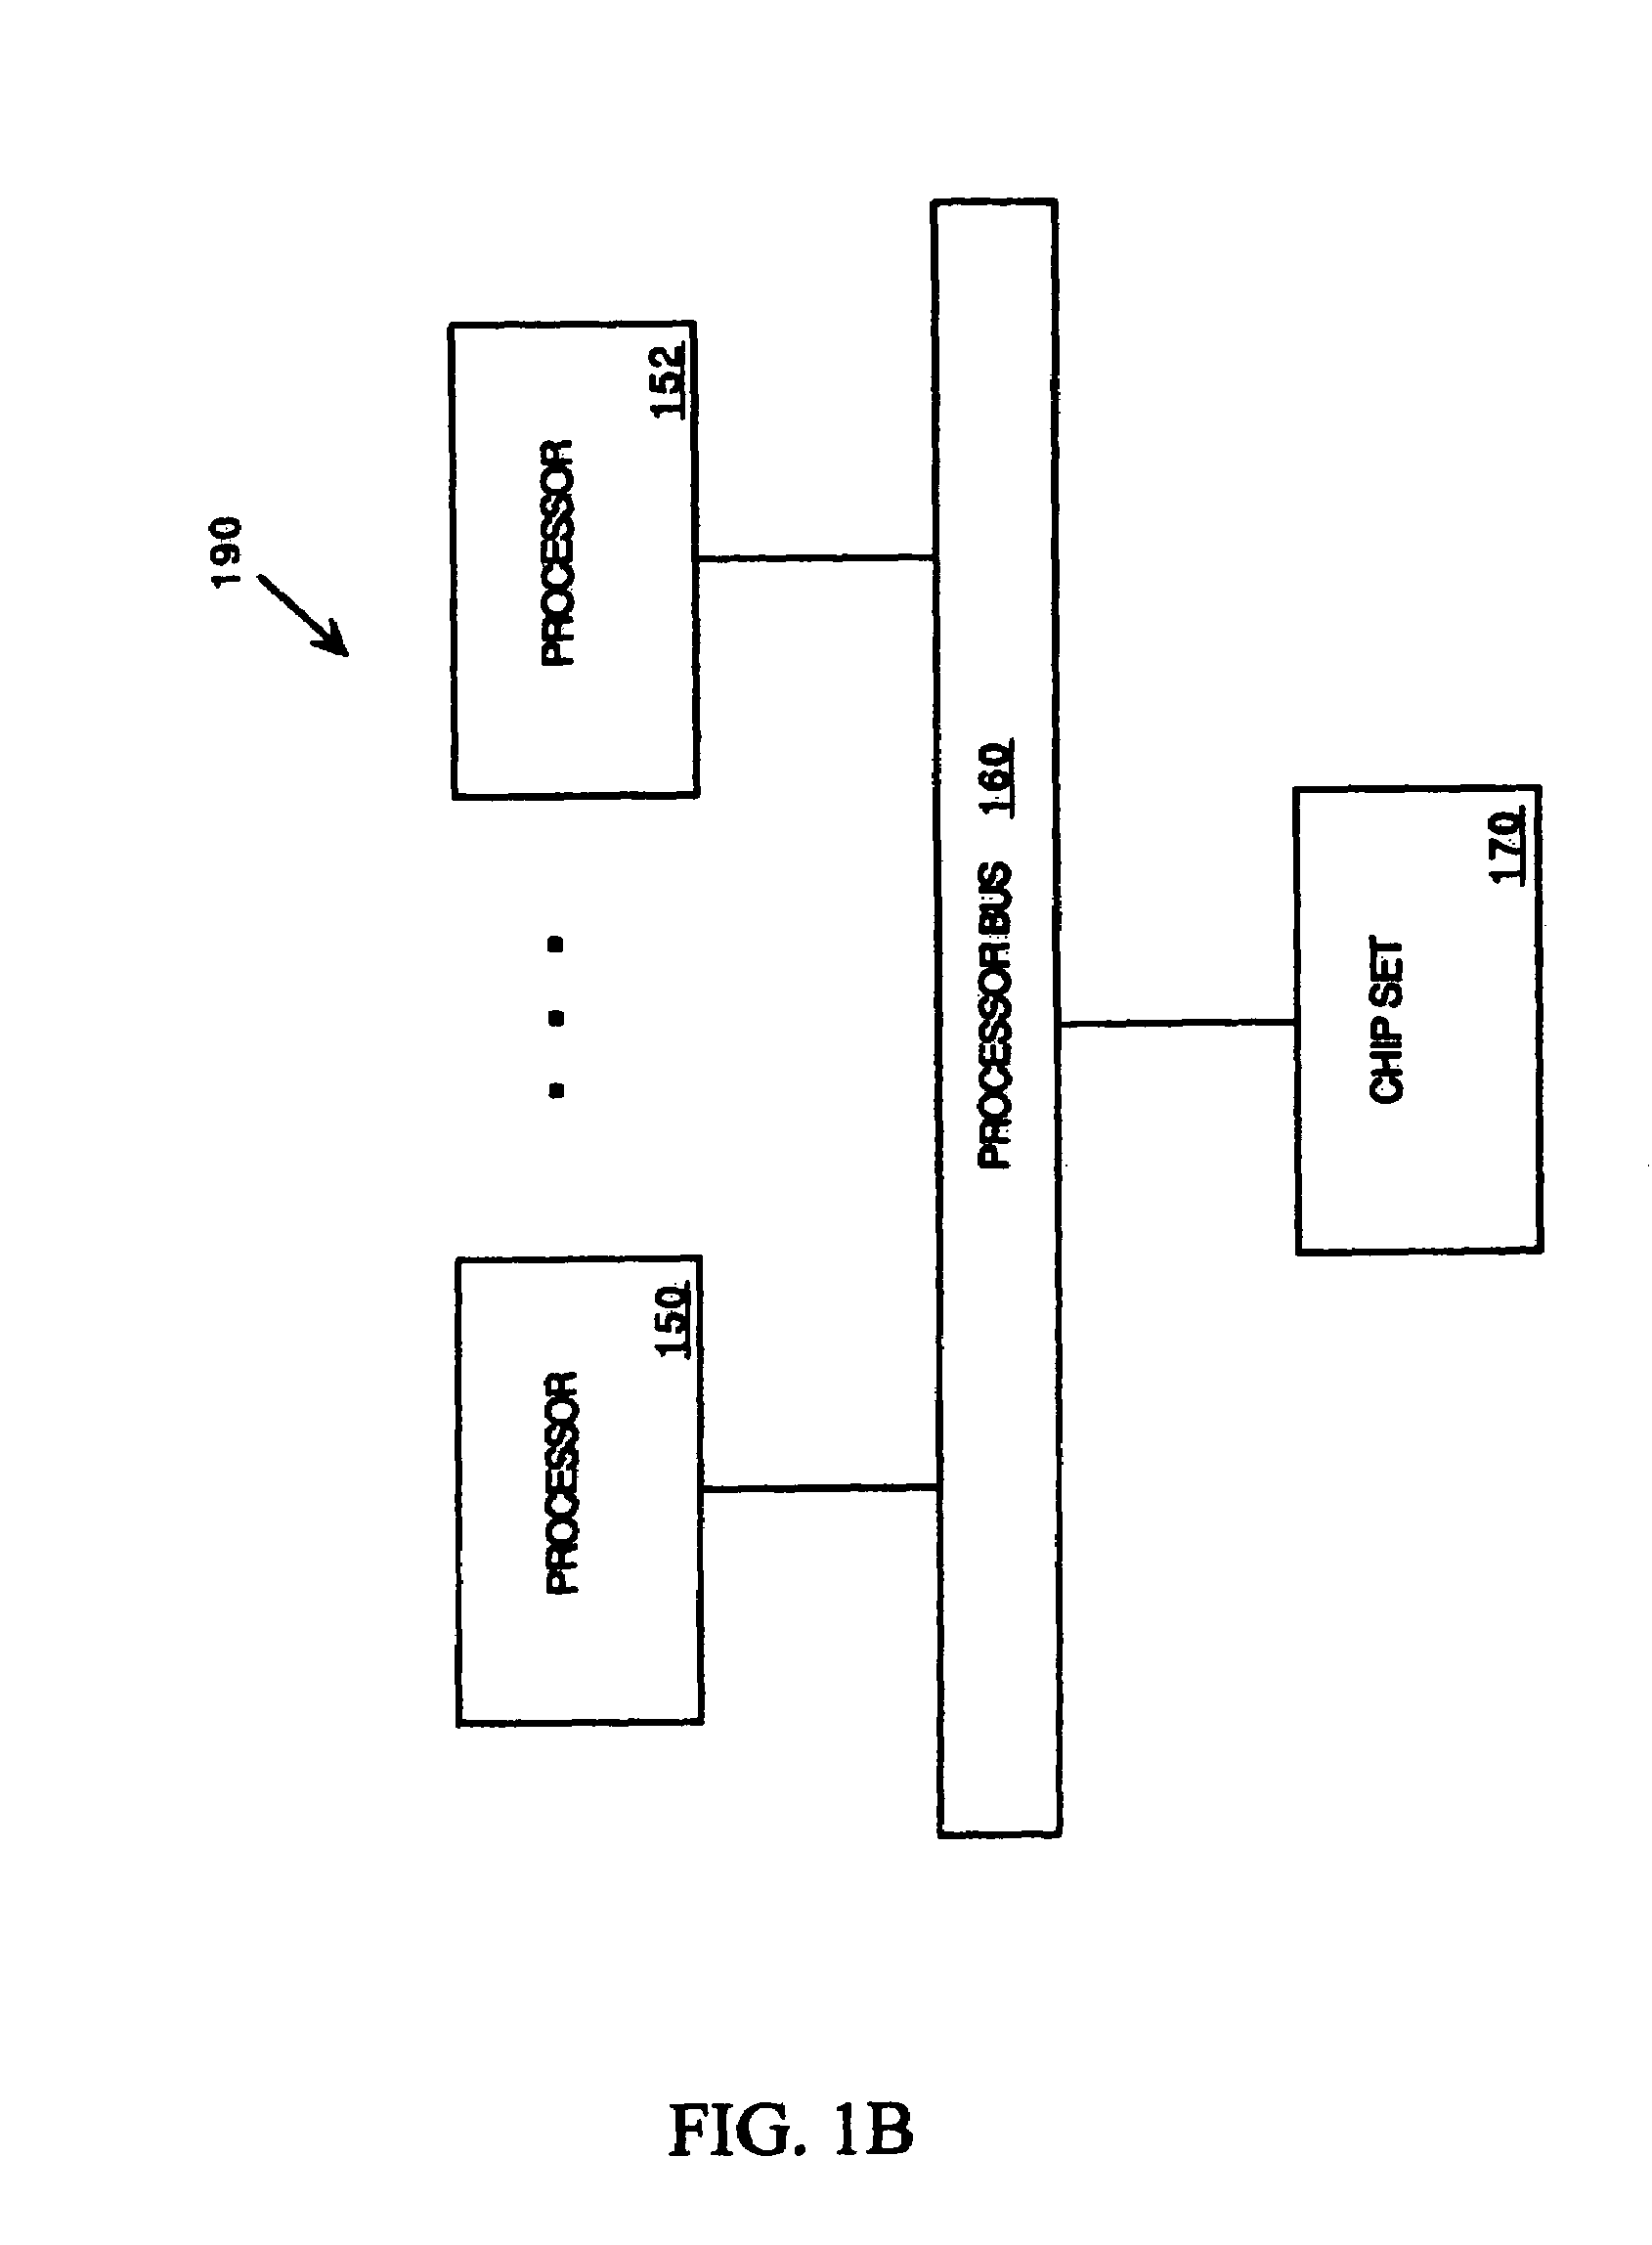 Two dimensional data eye centering for source synchronous data transfers